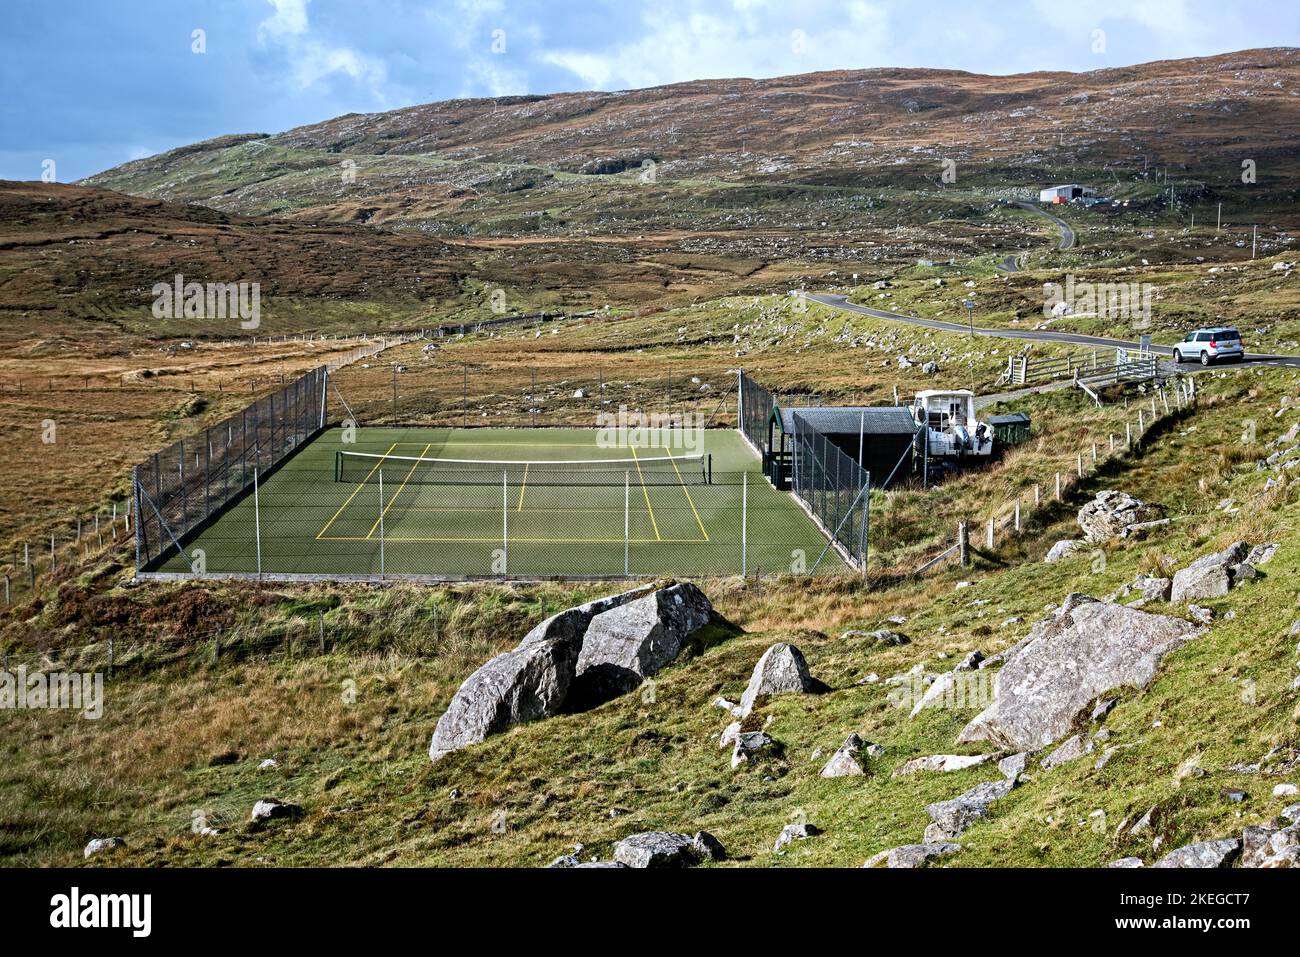 Bunabhainneadar tennis court, the UK's most remore tennis court on the Isle of Harris in the Outer Hebrides, Scotland, UK. Stock Photo